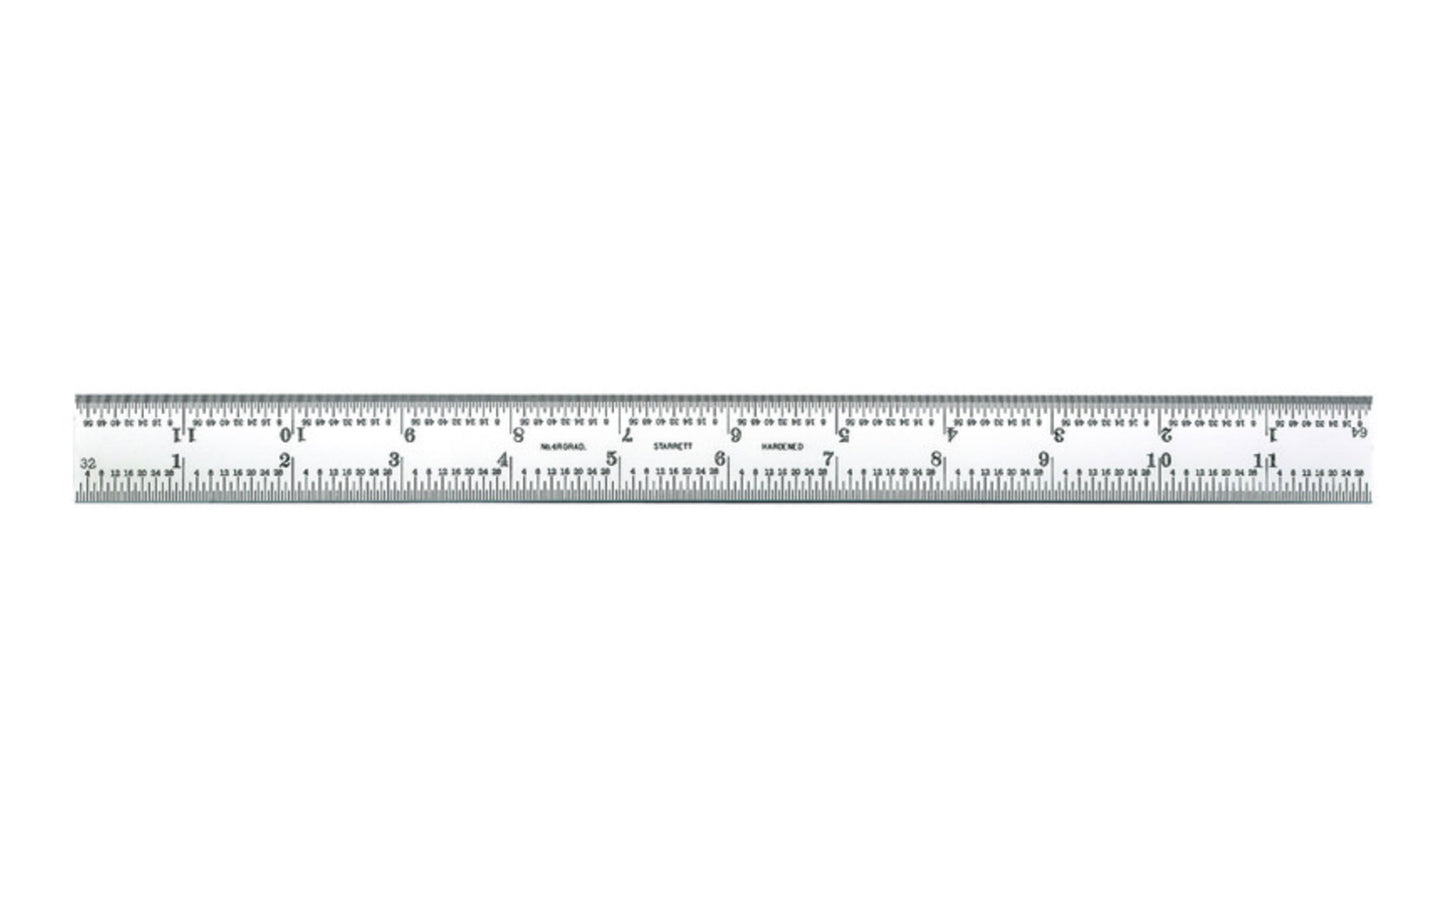 Starrett 12" Blade for Combo Square, Sets & Bevel Protractors. 1/8", 1/16", 1/32", 1/64" Grads. Satin Chrome finish blade. Blade only.  Made in USA. 049659500844.